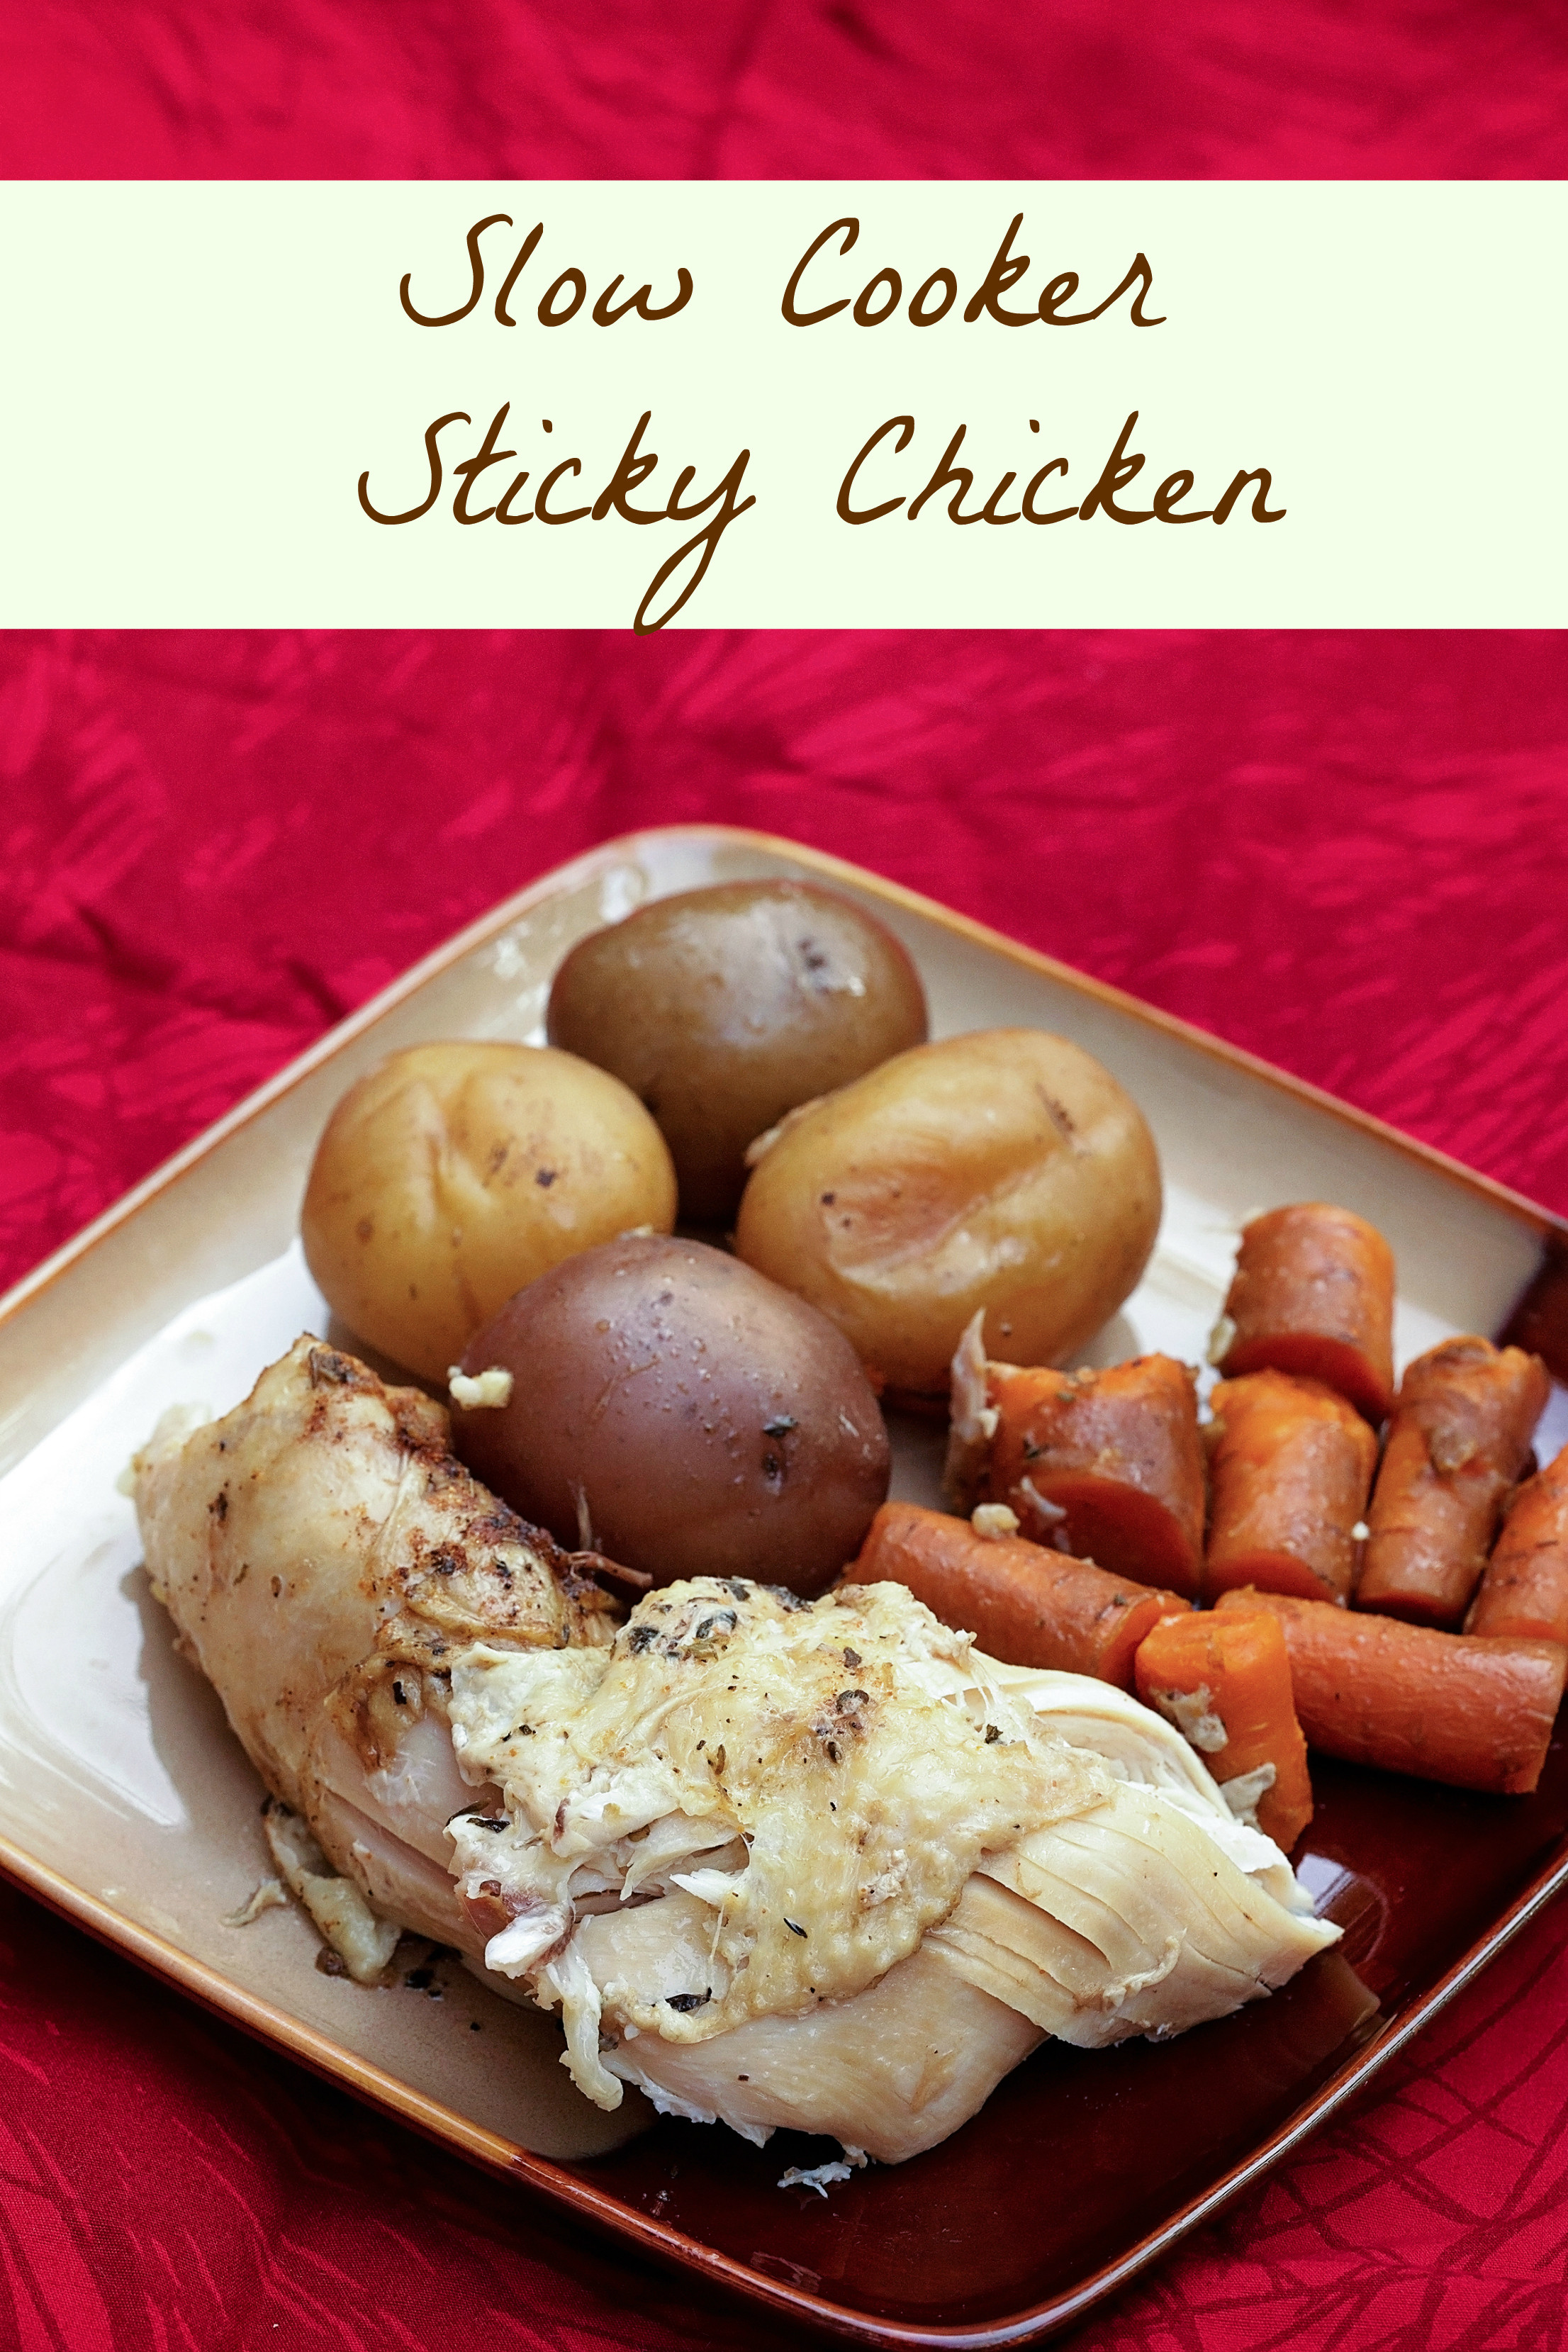 Low Calorie Slow Cooker Chicken Recipes
 Low Fat Slow Cooker Sticky Chicken Recipe SoFabFood